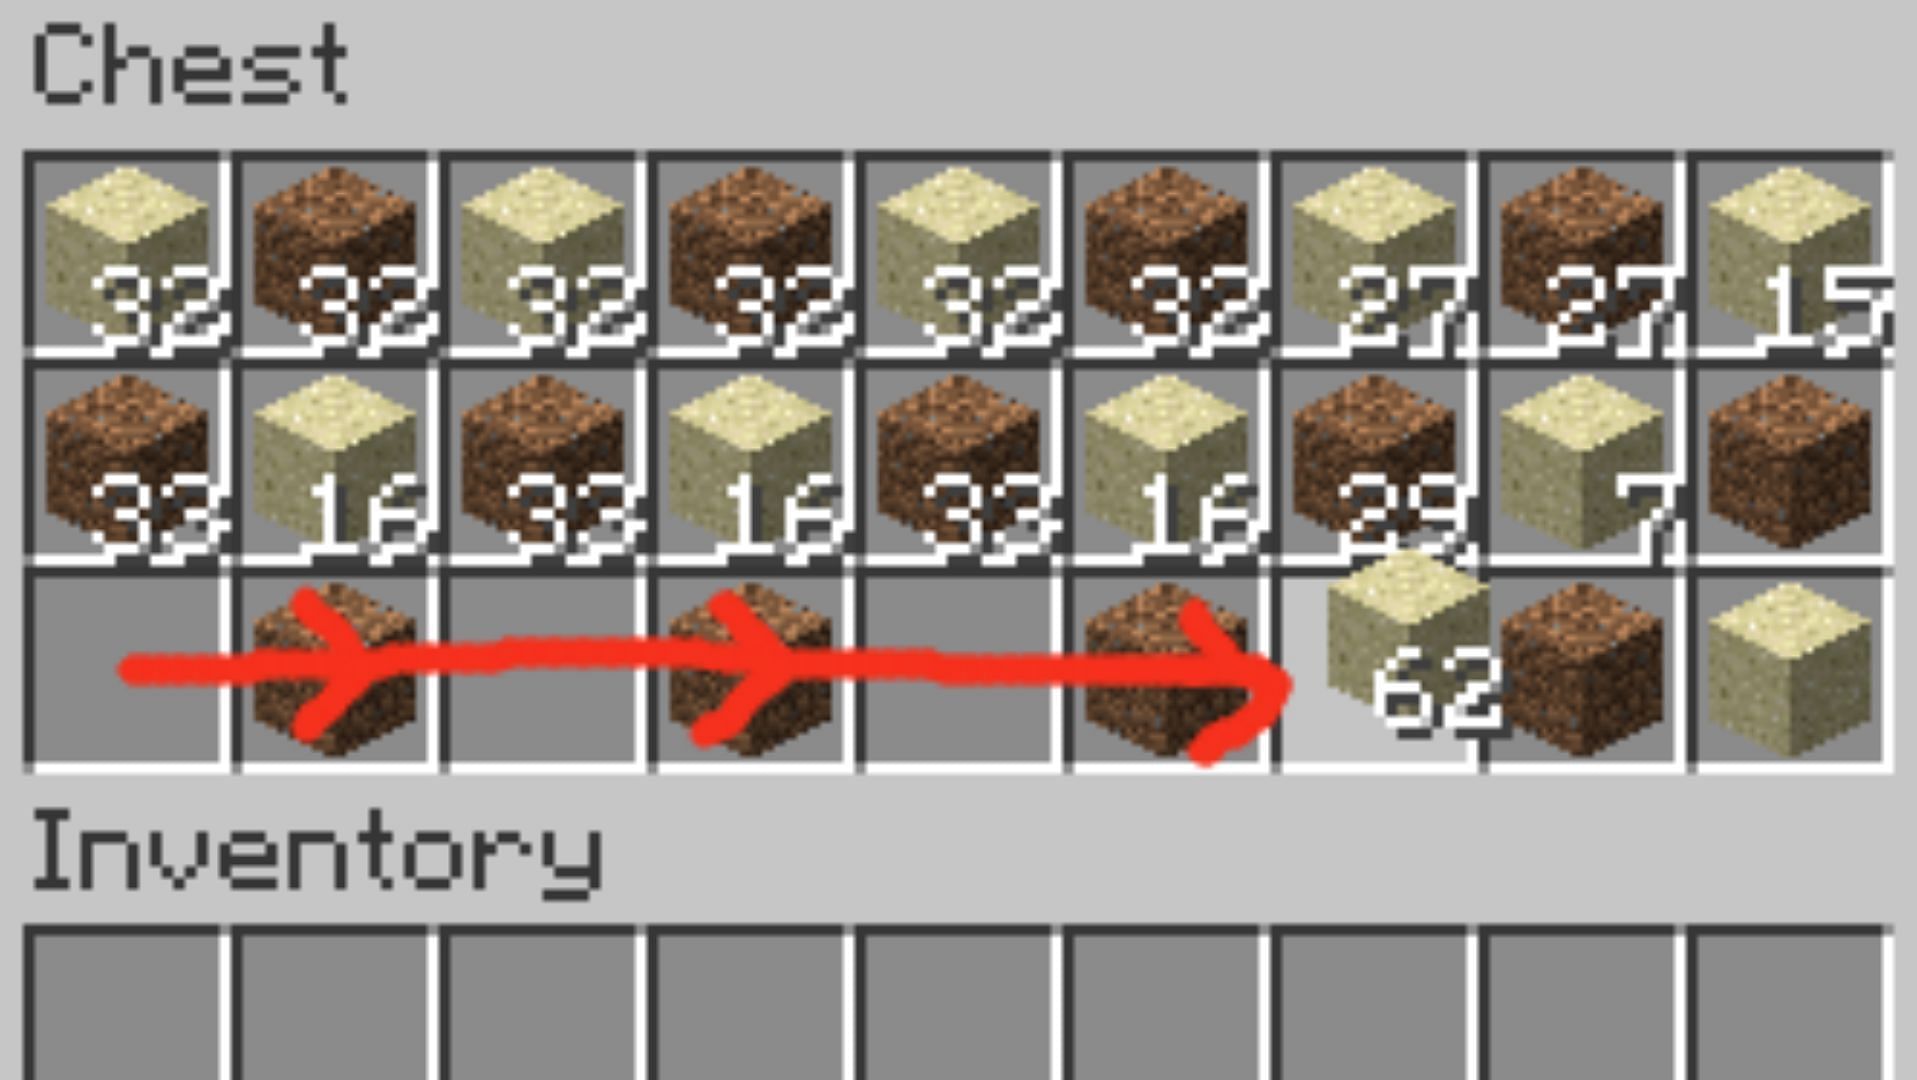 Mouse Tweaks adds several mouse shortcuts to better organize inventories and chests in Minecraft (Image via Mojang)